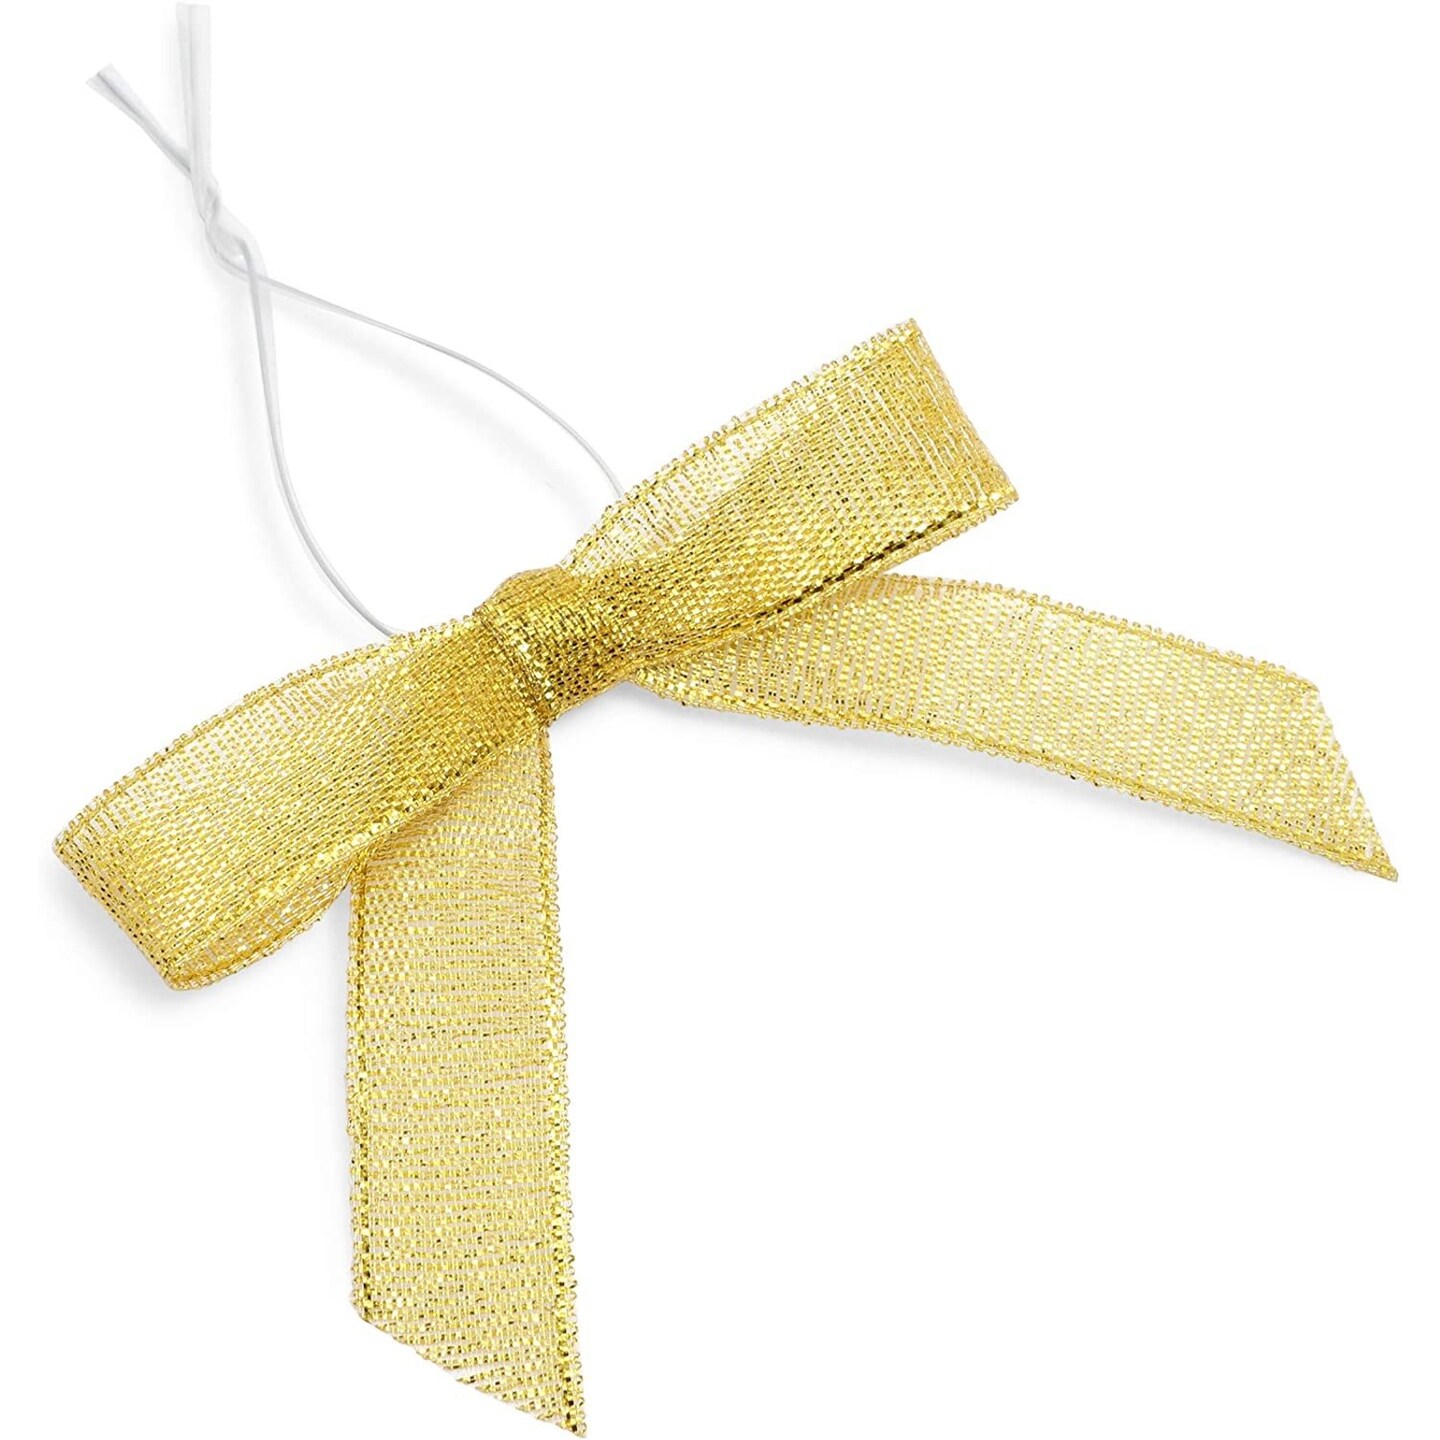 Pre-Tied Grosgrain Bows with Wire Twist Tie: Old Gold